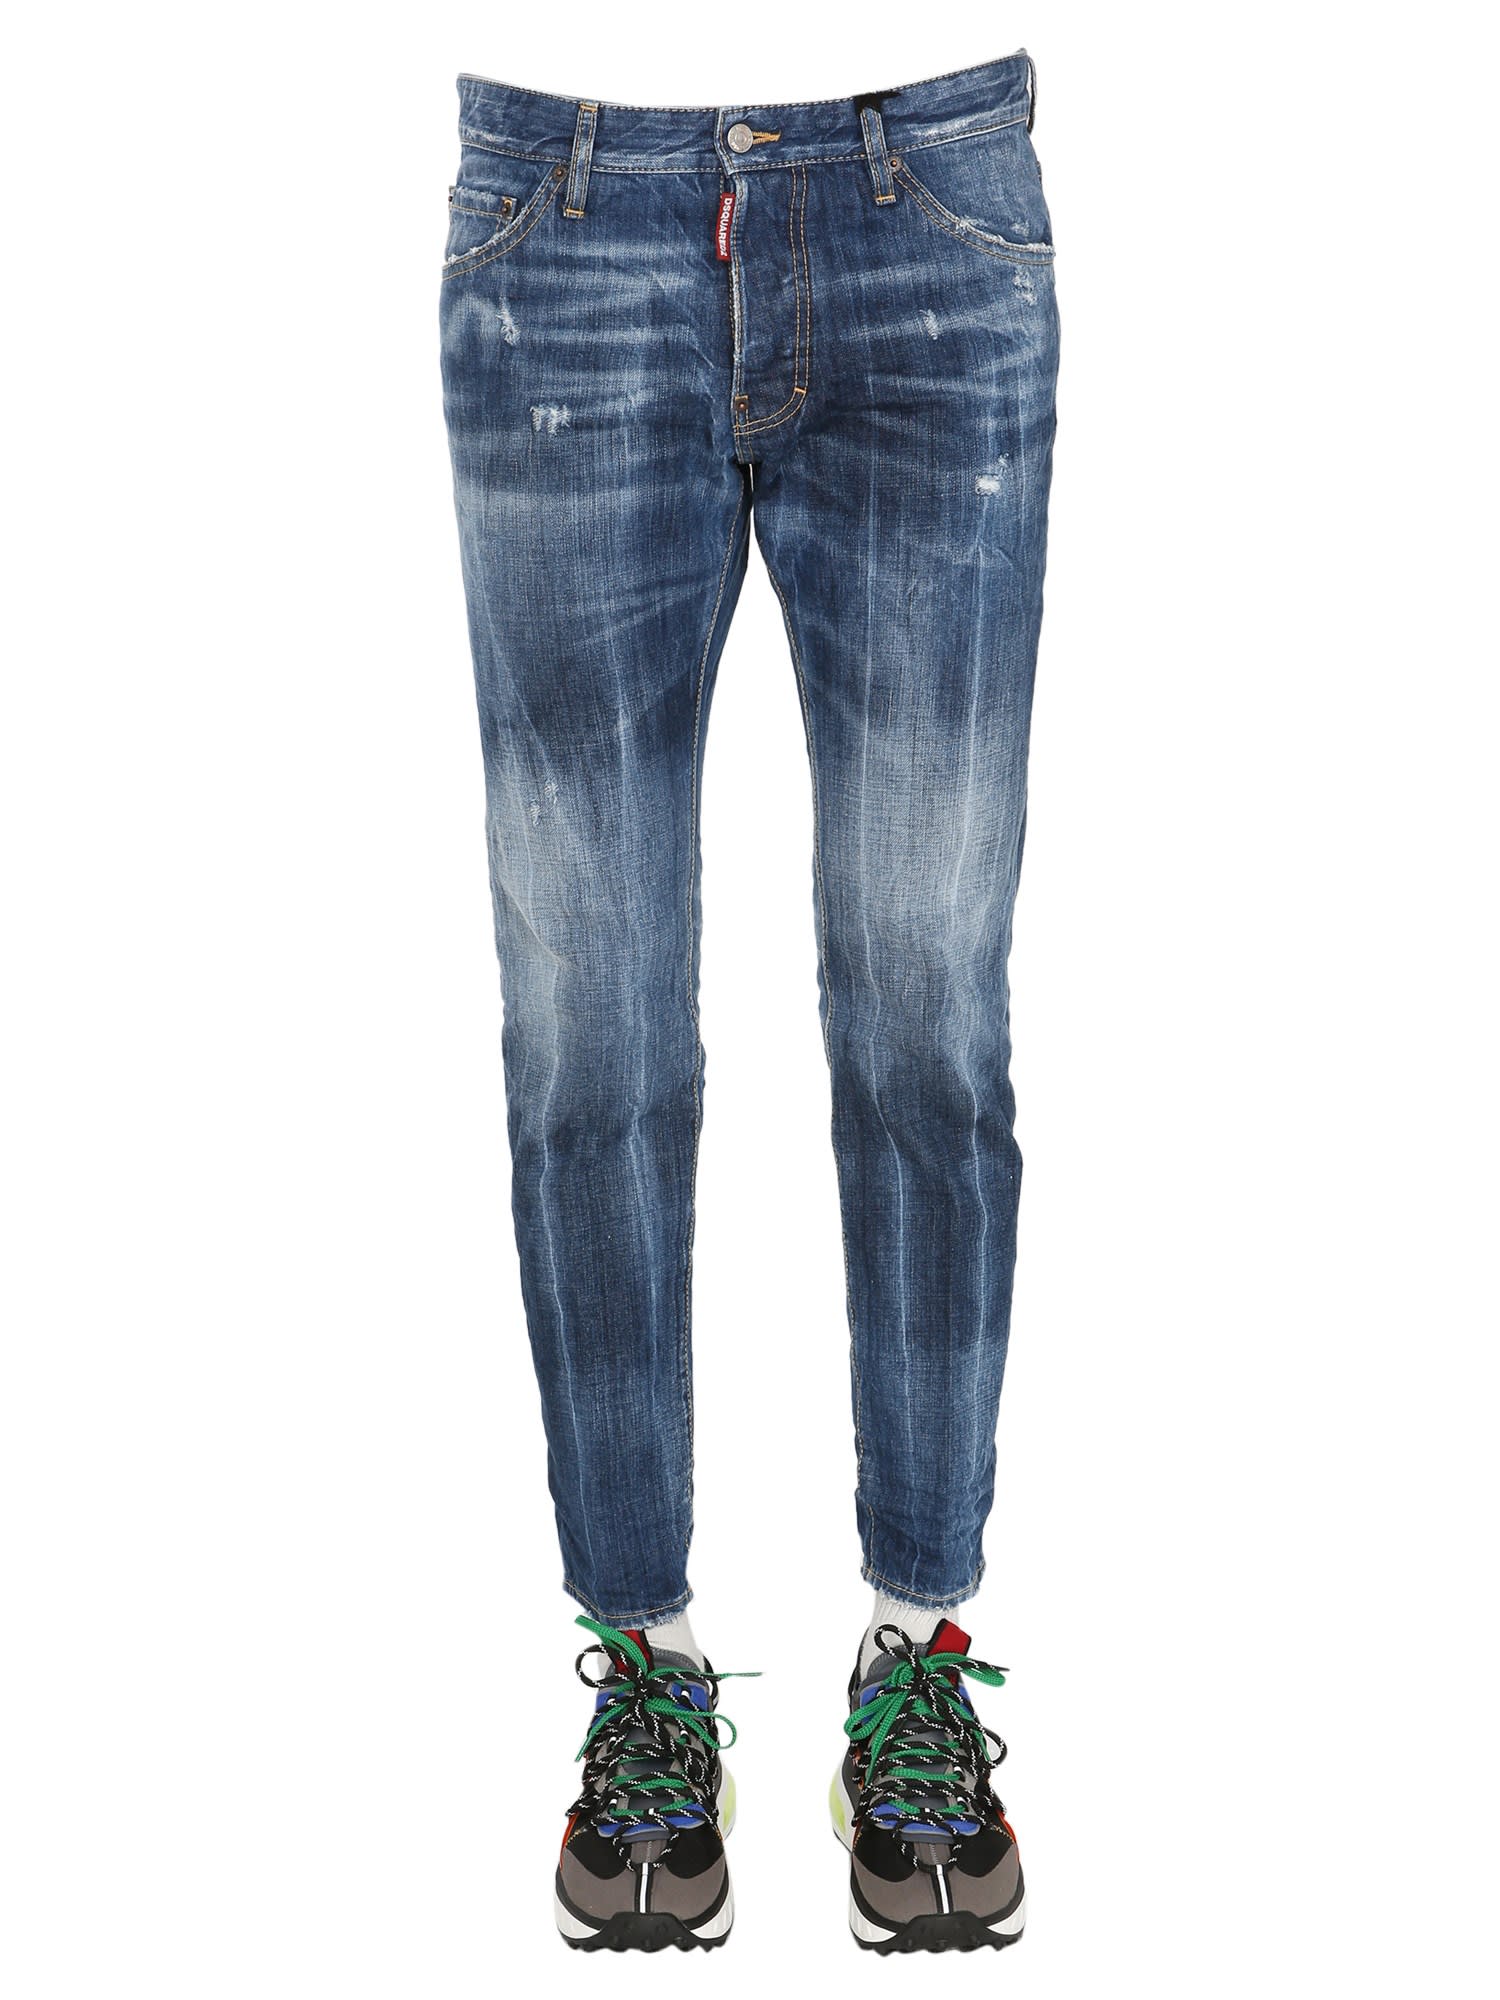 DSQUARED2 COOL GUY JEANS,S71LB0879 S30309470